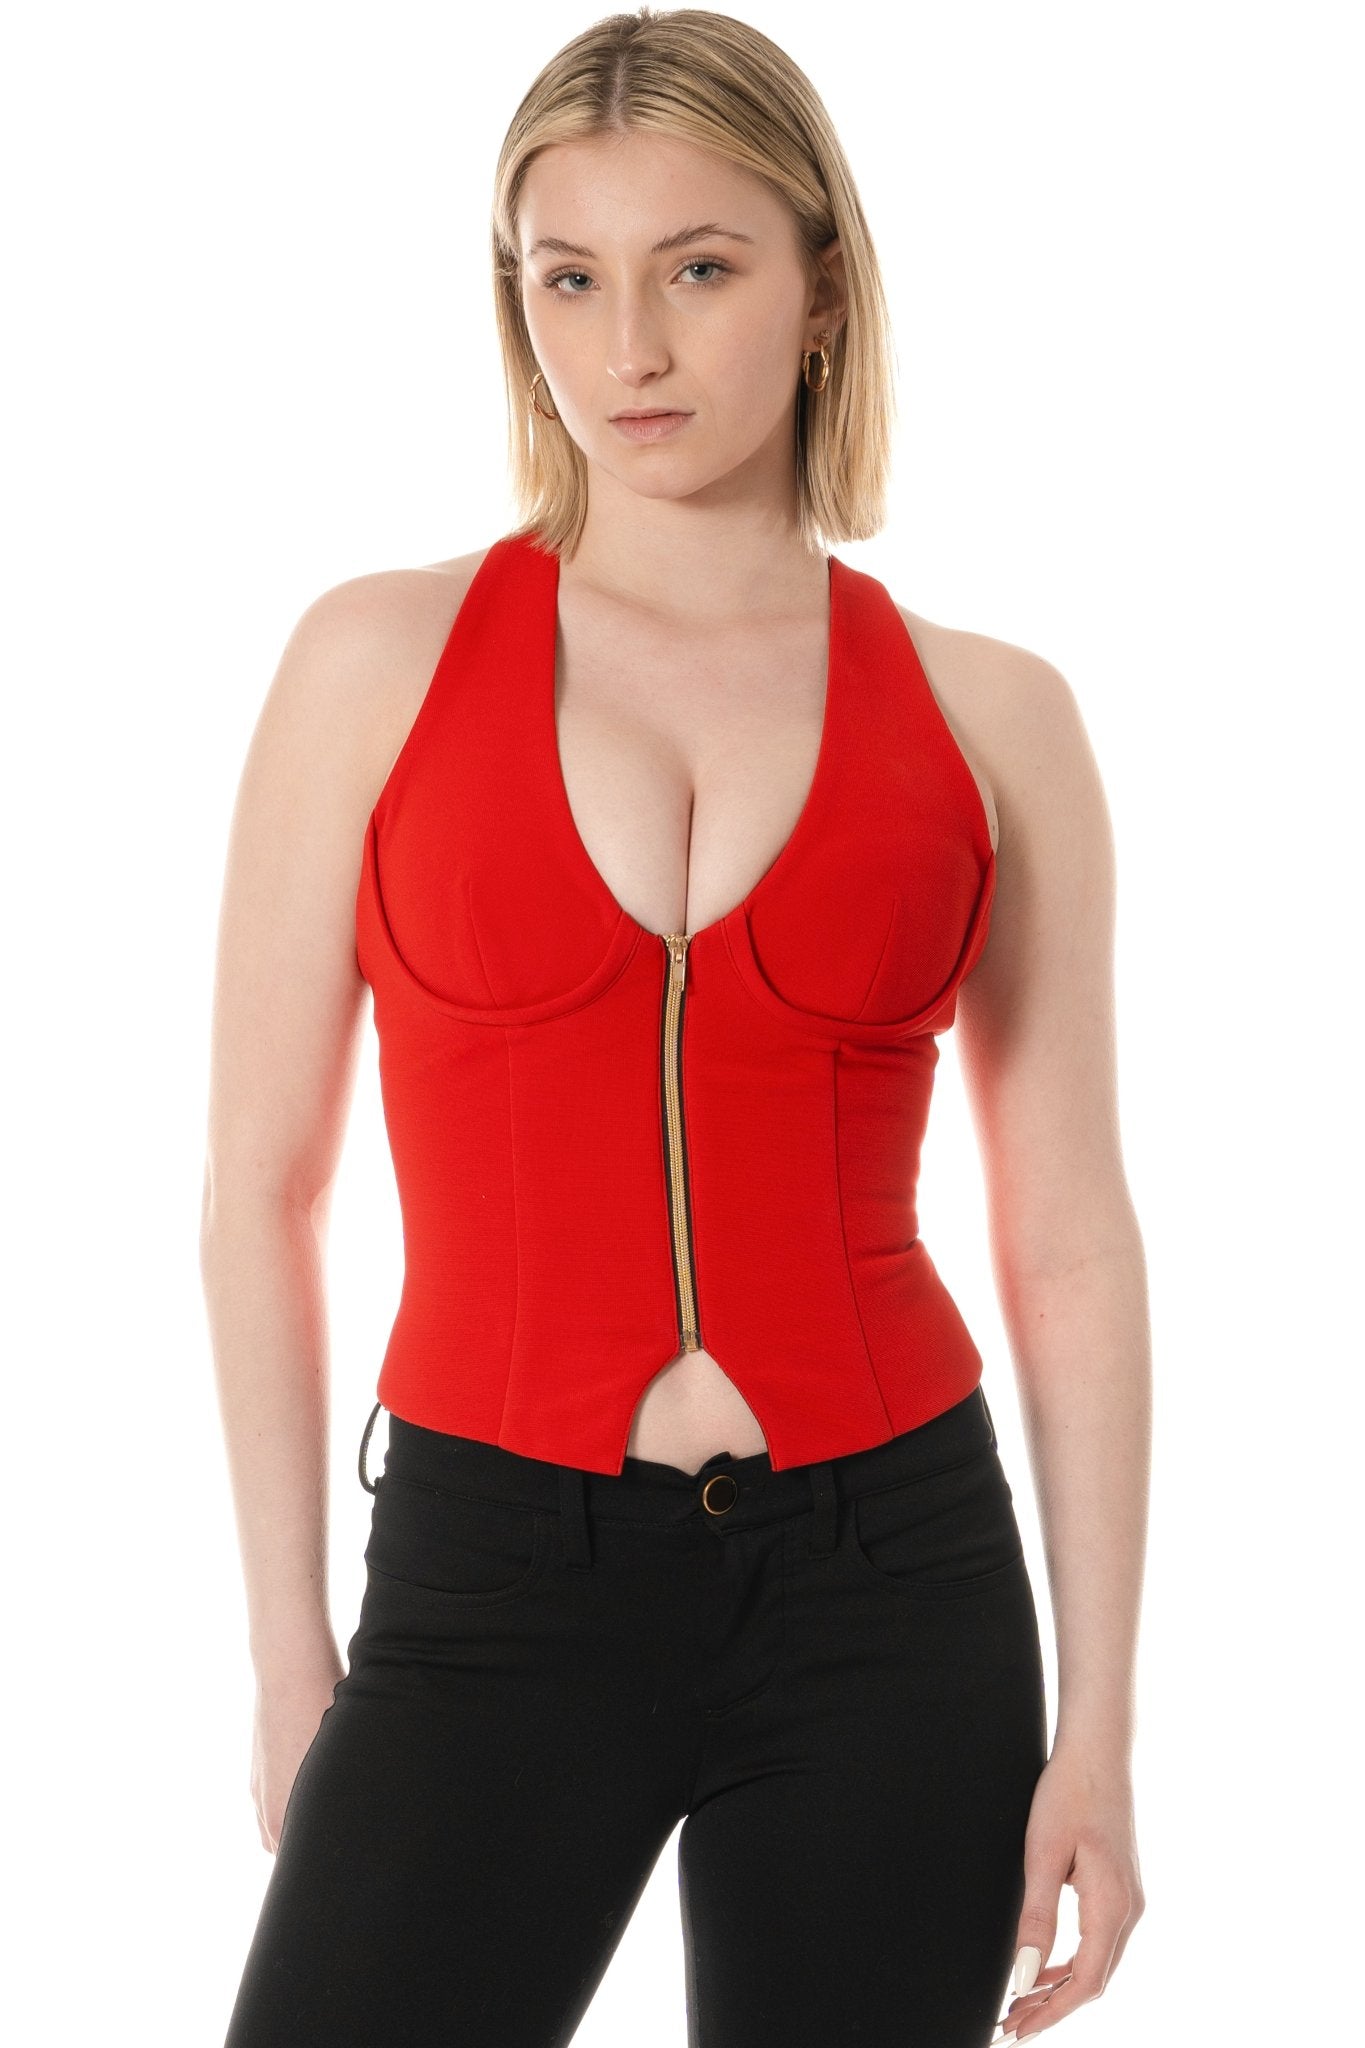 DAISY Bustier Uniform Top for casino, gaming, hotel, restaurants, hospitality, and resorts. Corset uniform in red with racer back.- KAPTVA Apparel